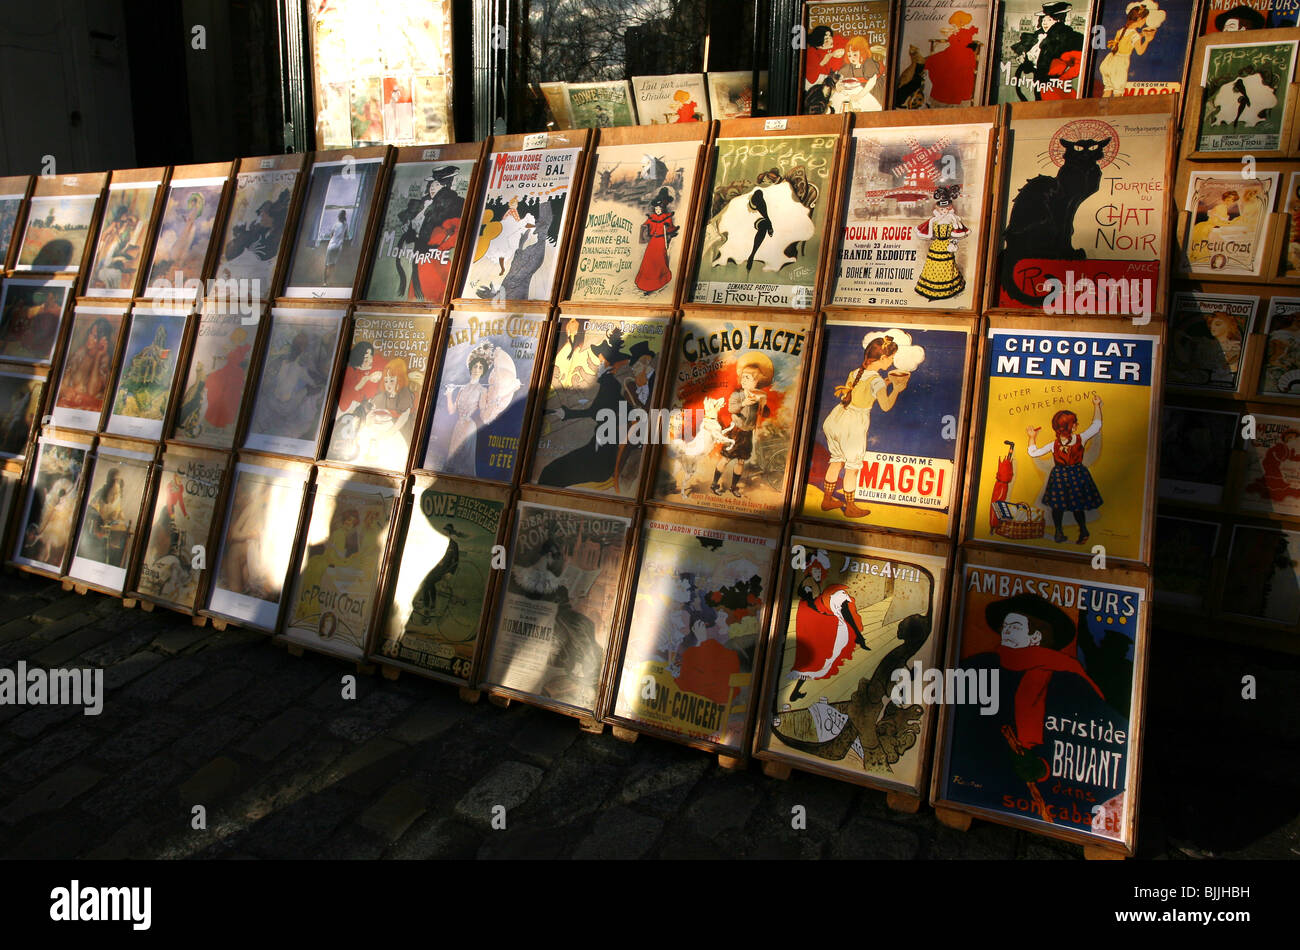 People's shadows are seen against vintage French posters in Monmatre, Paris Stock Photo